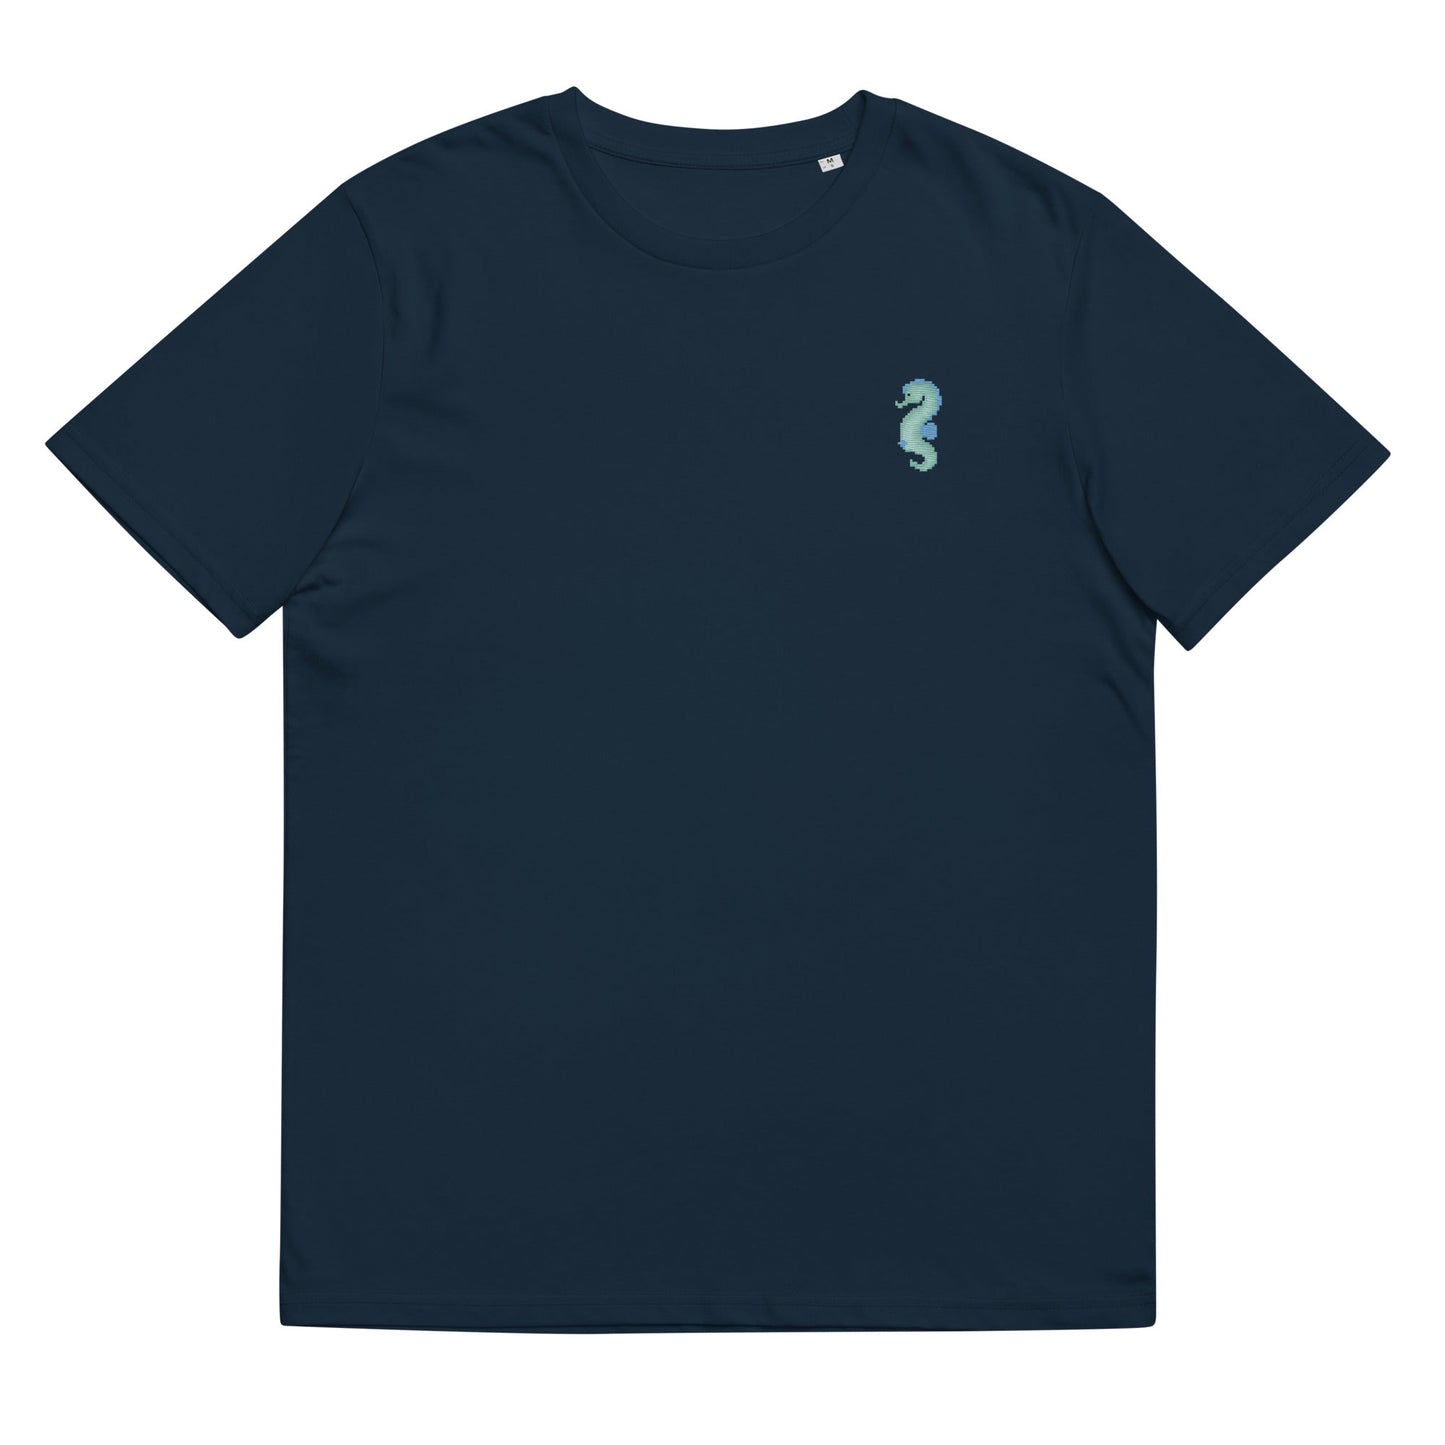 Local Summer Collective Sea Dragon Embroidered Unisex Organic Cotton T-Shirt